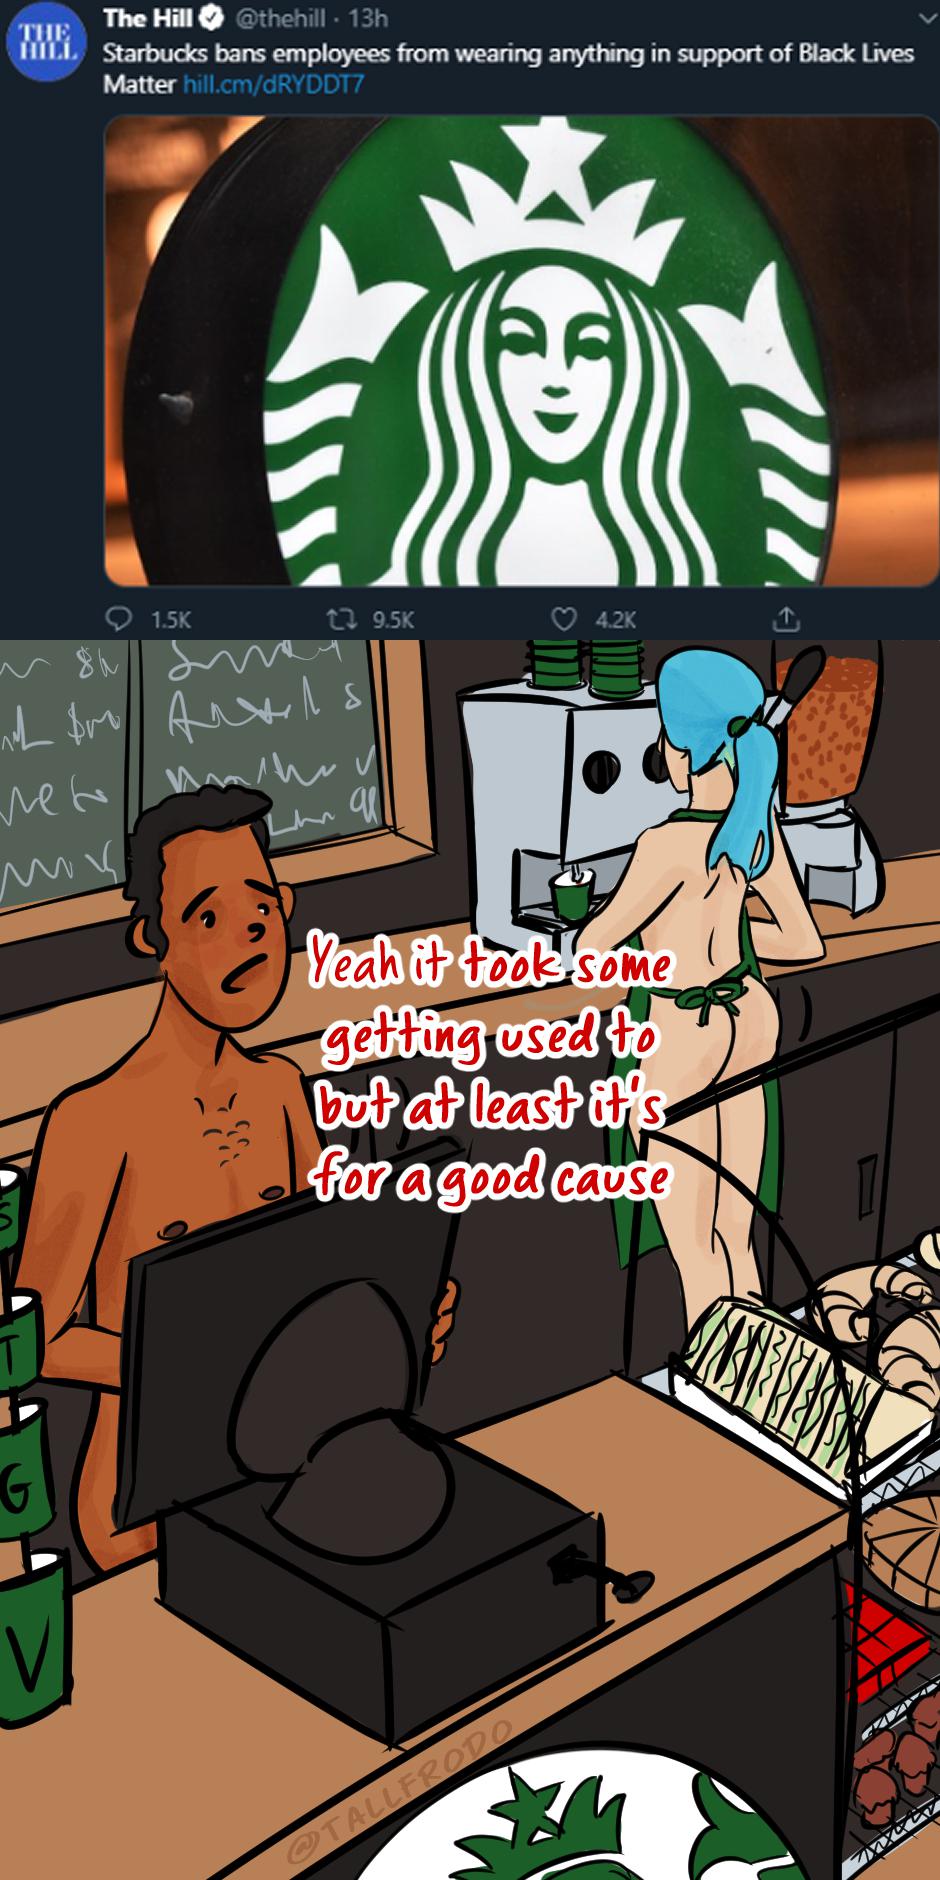 nsfw Comics nsfw text: The Hill @thehill • 13h Starbucks bans employees from anything in support of Black Lives —e' MatterhIllcm/dRYDDT7 0 1.5K 9.5K 0 42K Yuh\i+X+oøkrsøMe gei+ing used buf  lea  for a cause 